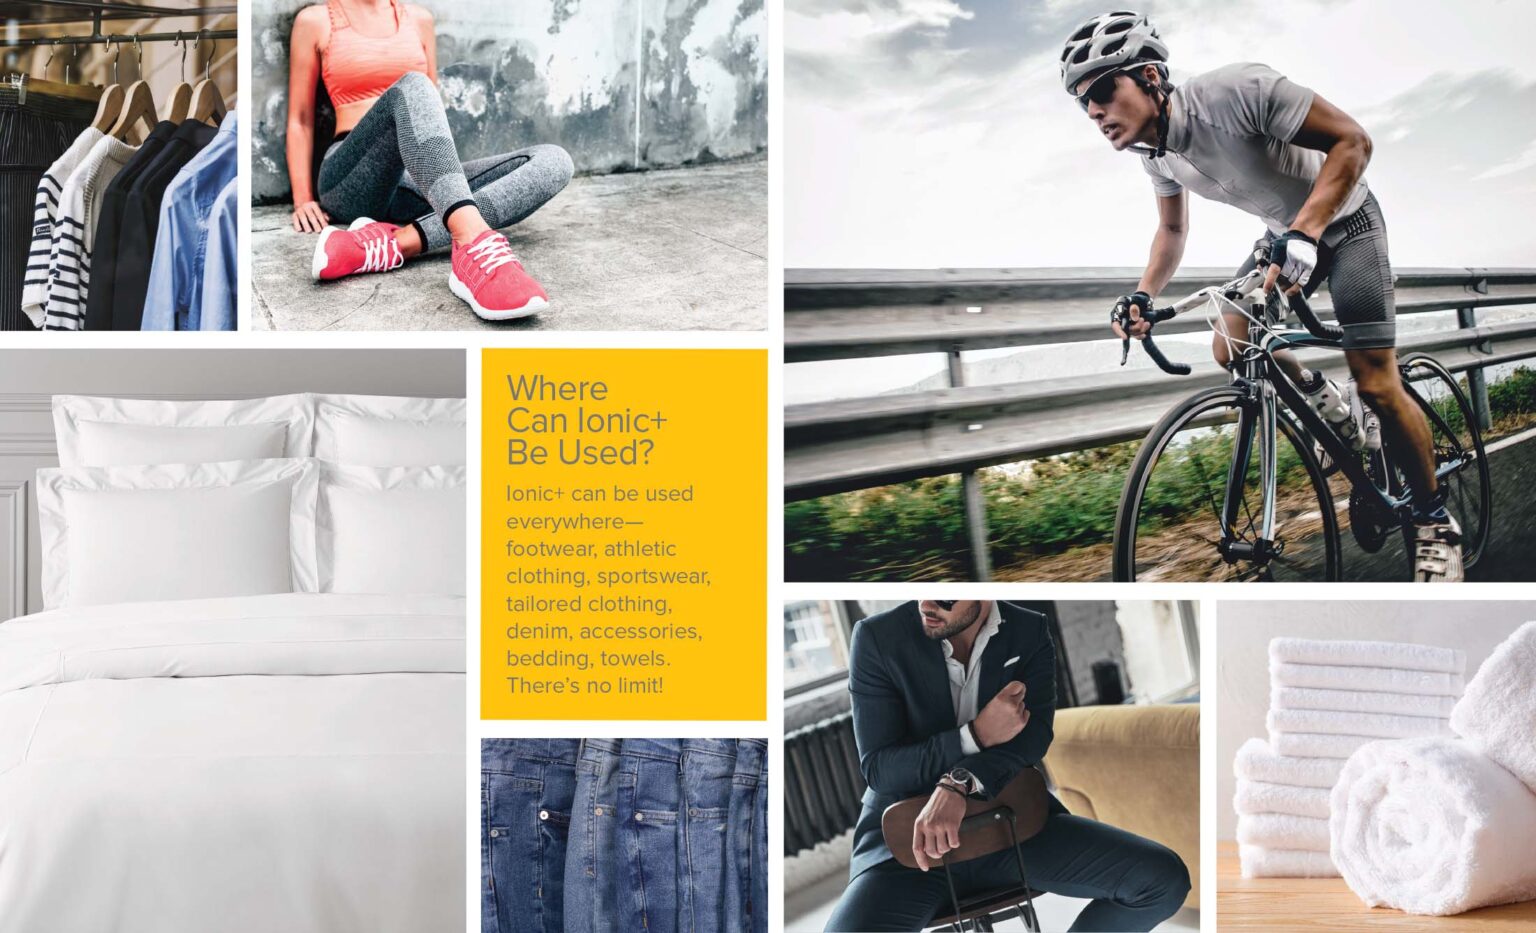 The Ionic+ Antimicrobial Advantage™ technology can be used everywhere—footwear, athletic clothing, sportswear, tailored clothing, denim, accessories, bedding, towels. Photo courtesy of Noble Biomaterials